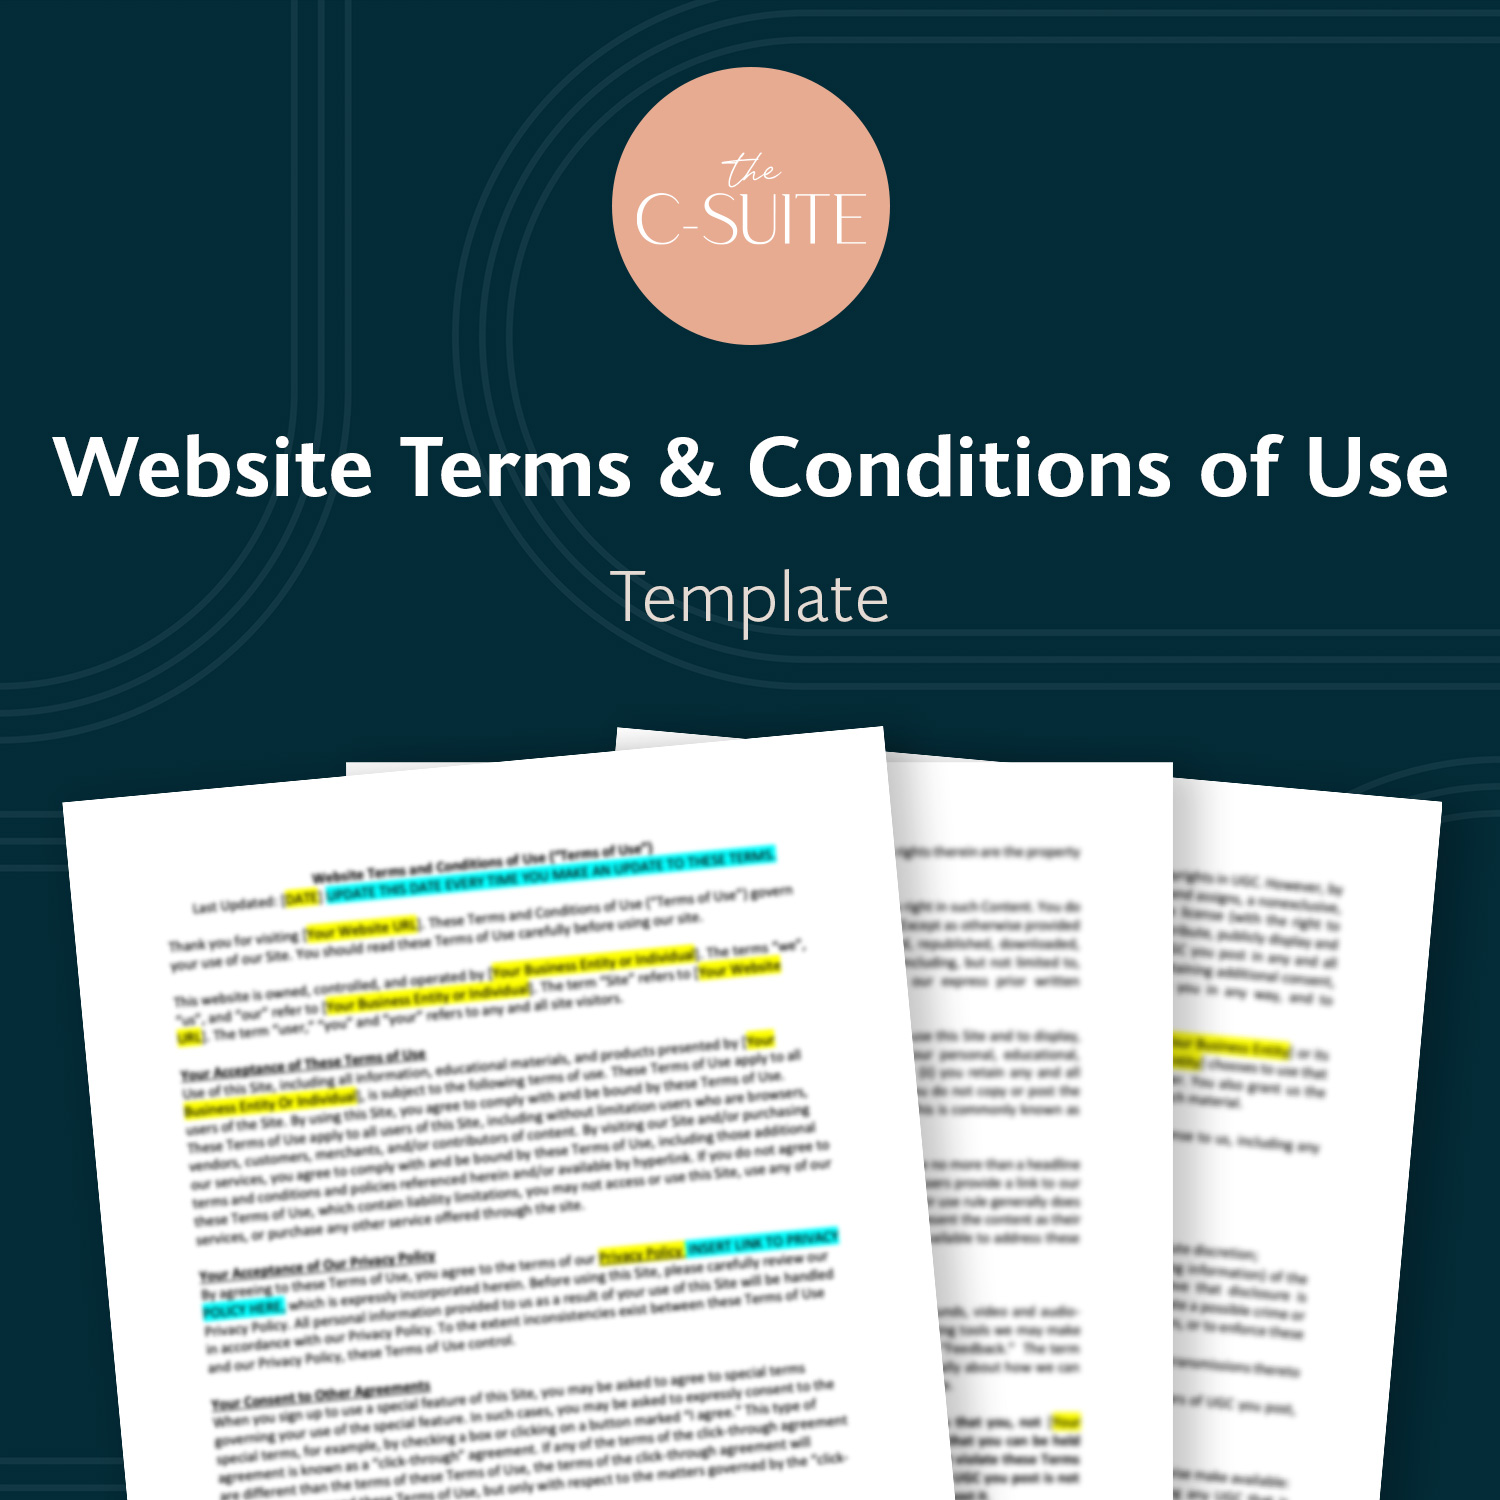 Website Terms & Conditions Template